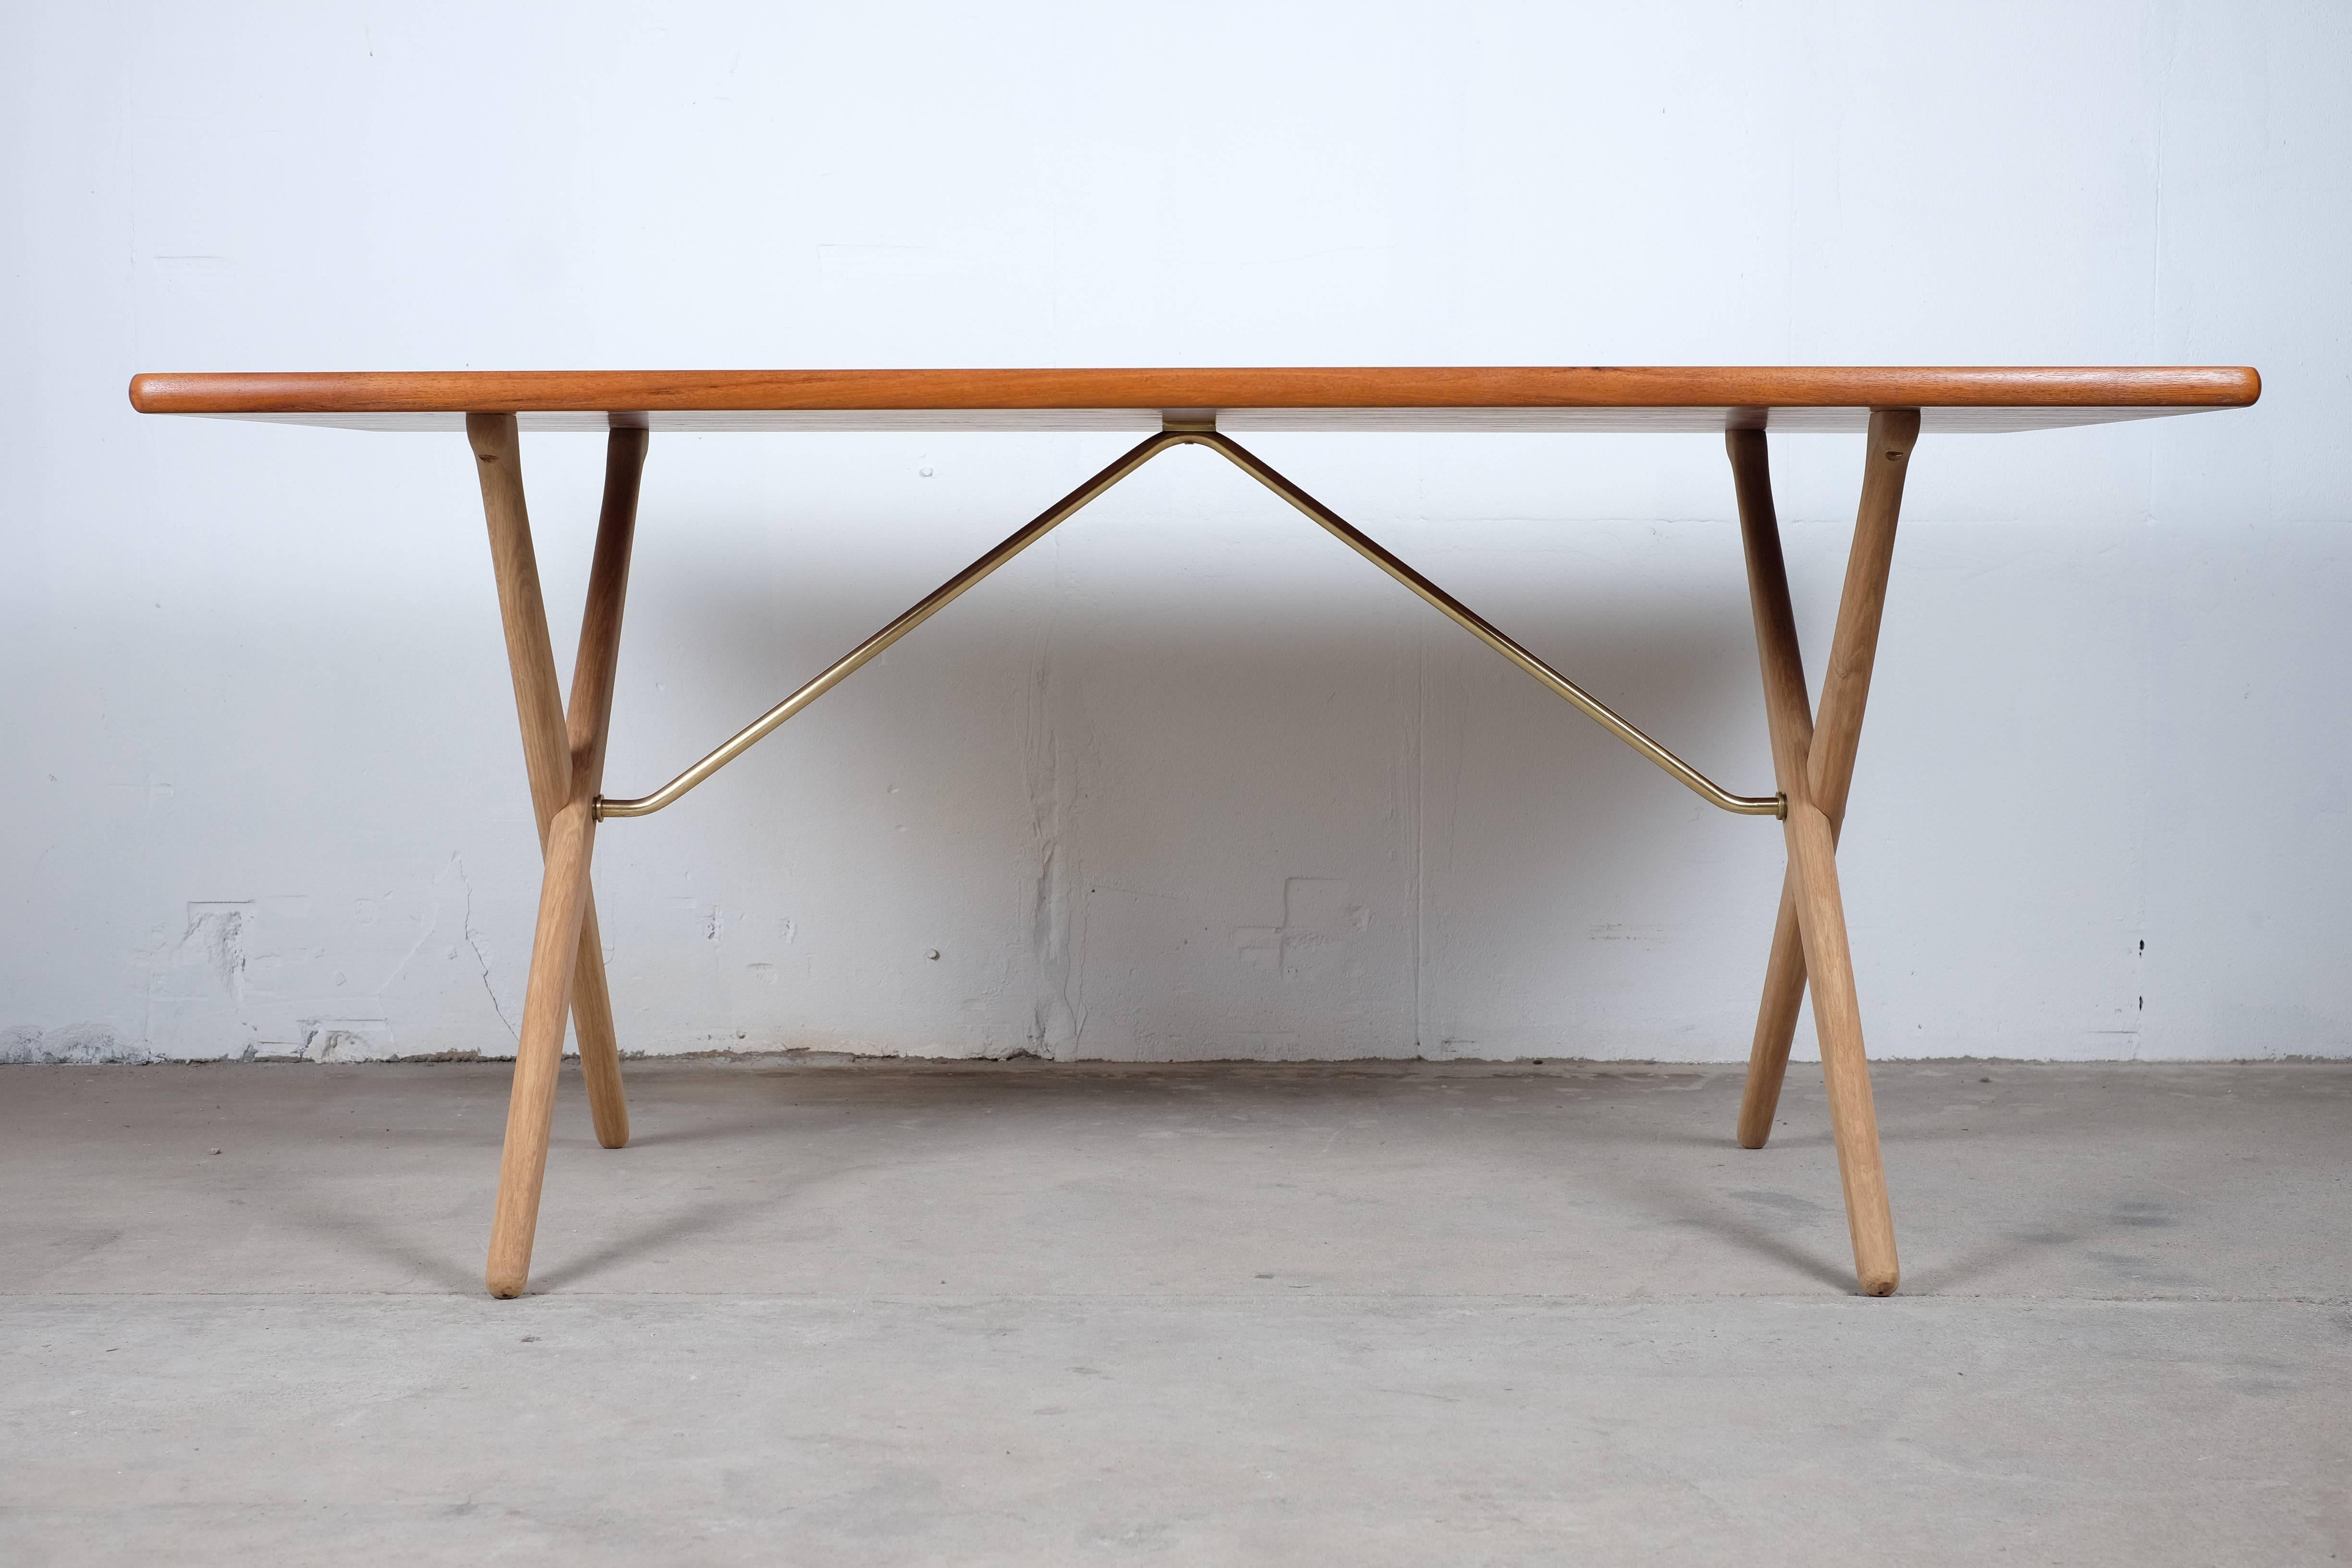 Rare dining table with cross legs - model AT-303 designed by Hans J. Wegner. Produced by Andreas Tuck in Denmark. 

The table legs are made of solid oak and supported by beautiful brass brackets. The tabletop is teak.

The table has been to an